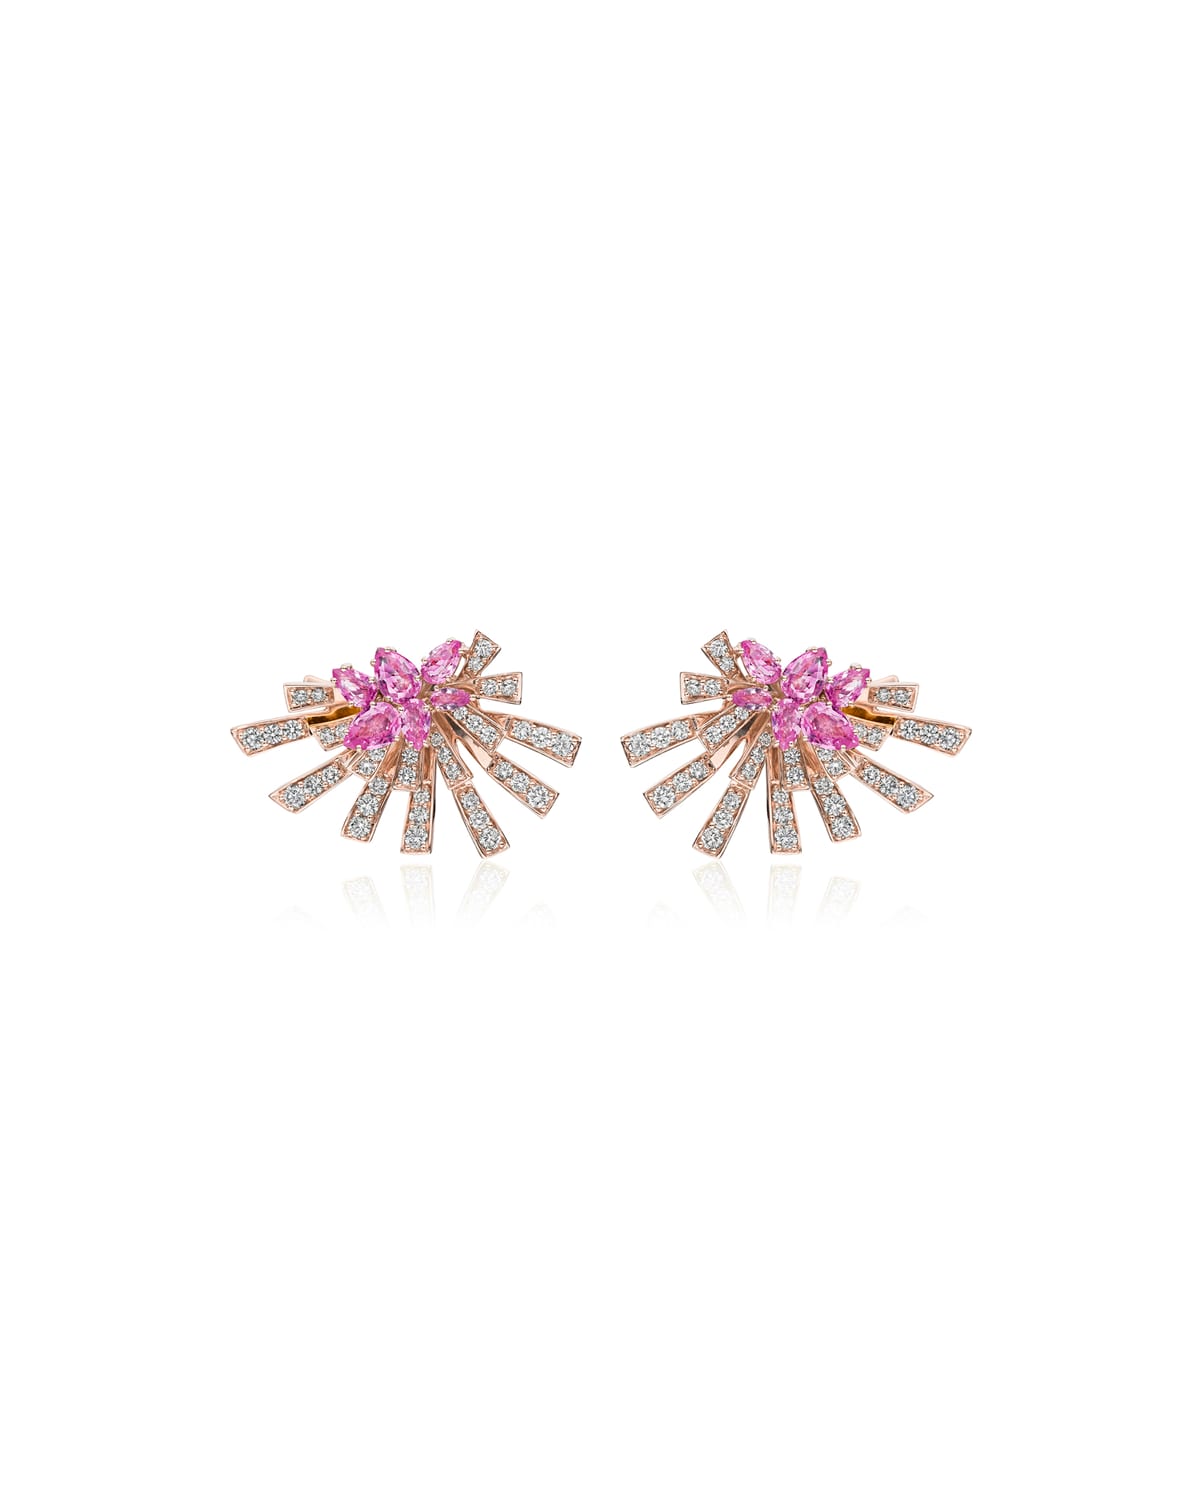 Hueb Mirage 18k Pink Gold Pink Sapphire And Diamond Cluster Earrings